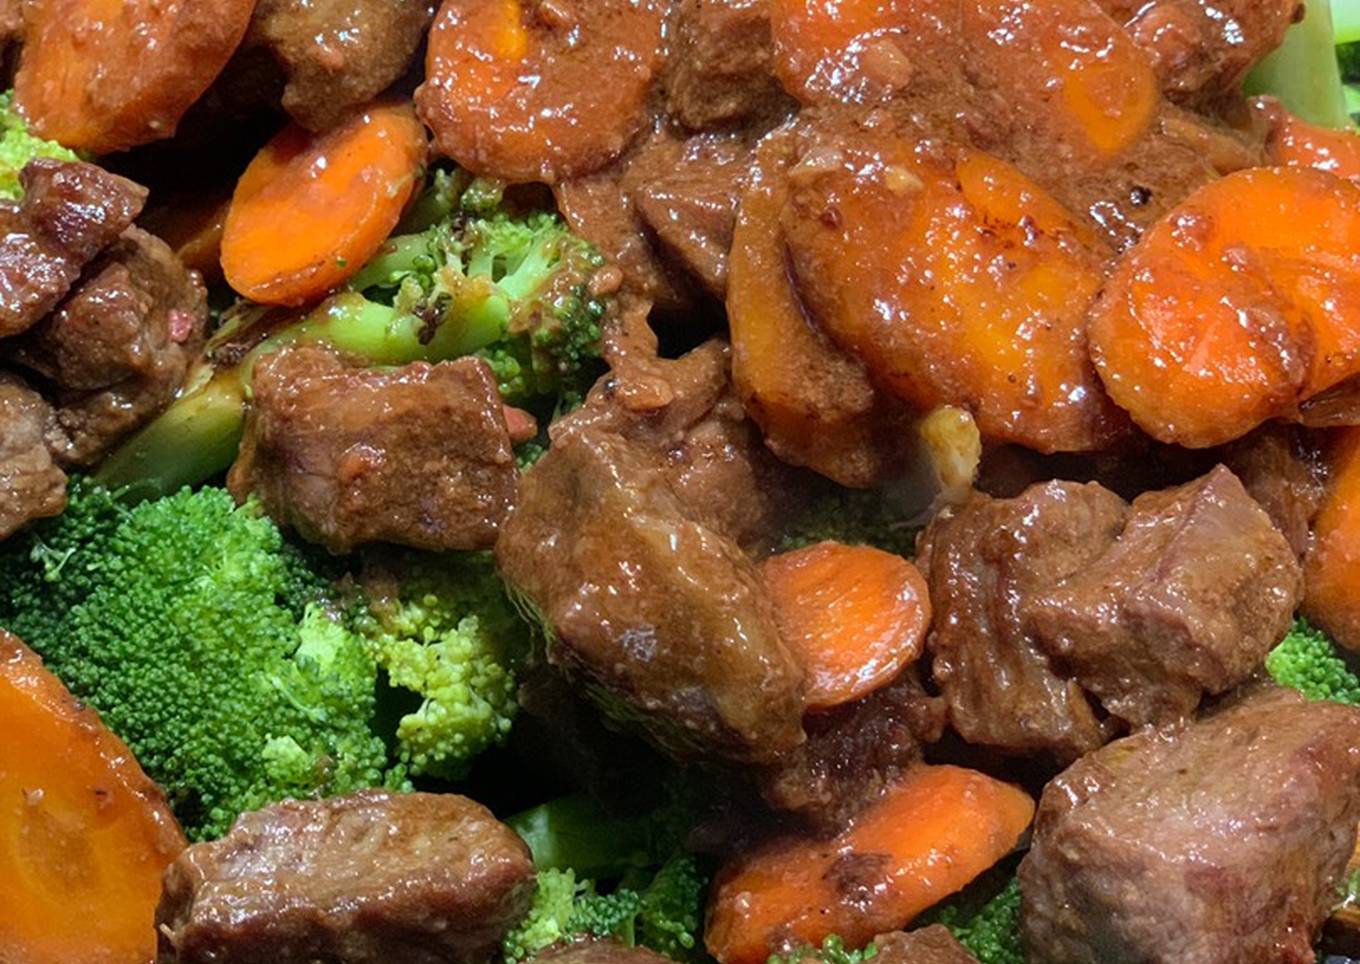 Mel’s versions of Beef and Broccoli Stir Fry